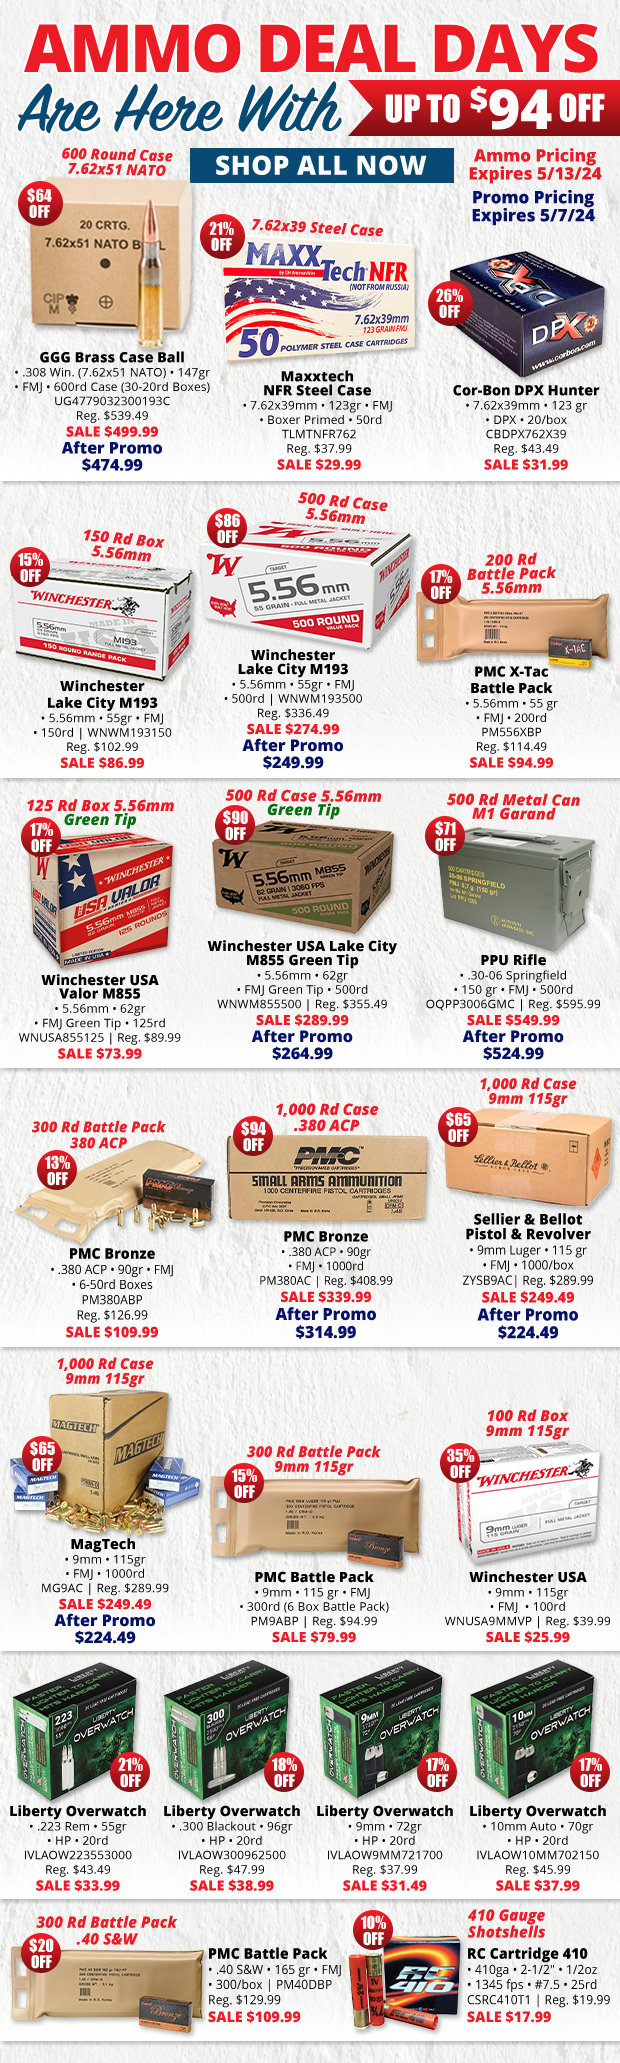 Up to $94 Off with Ammo Deal Days